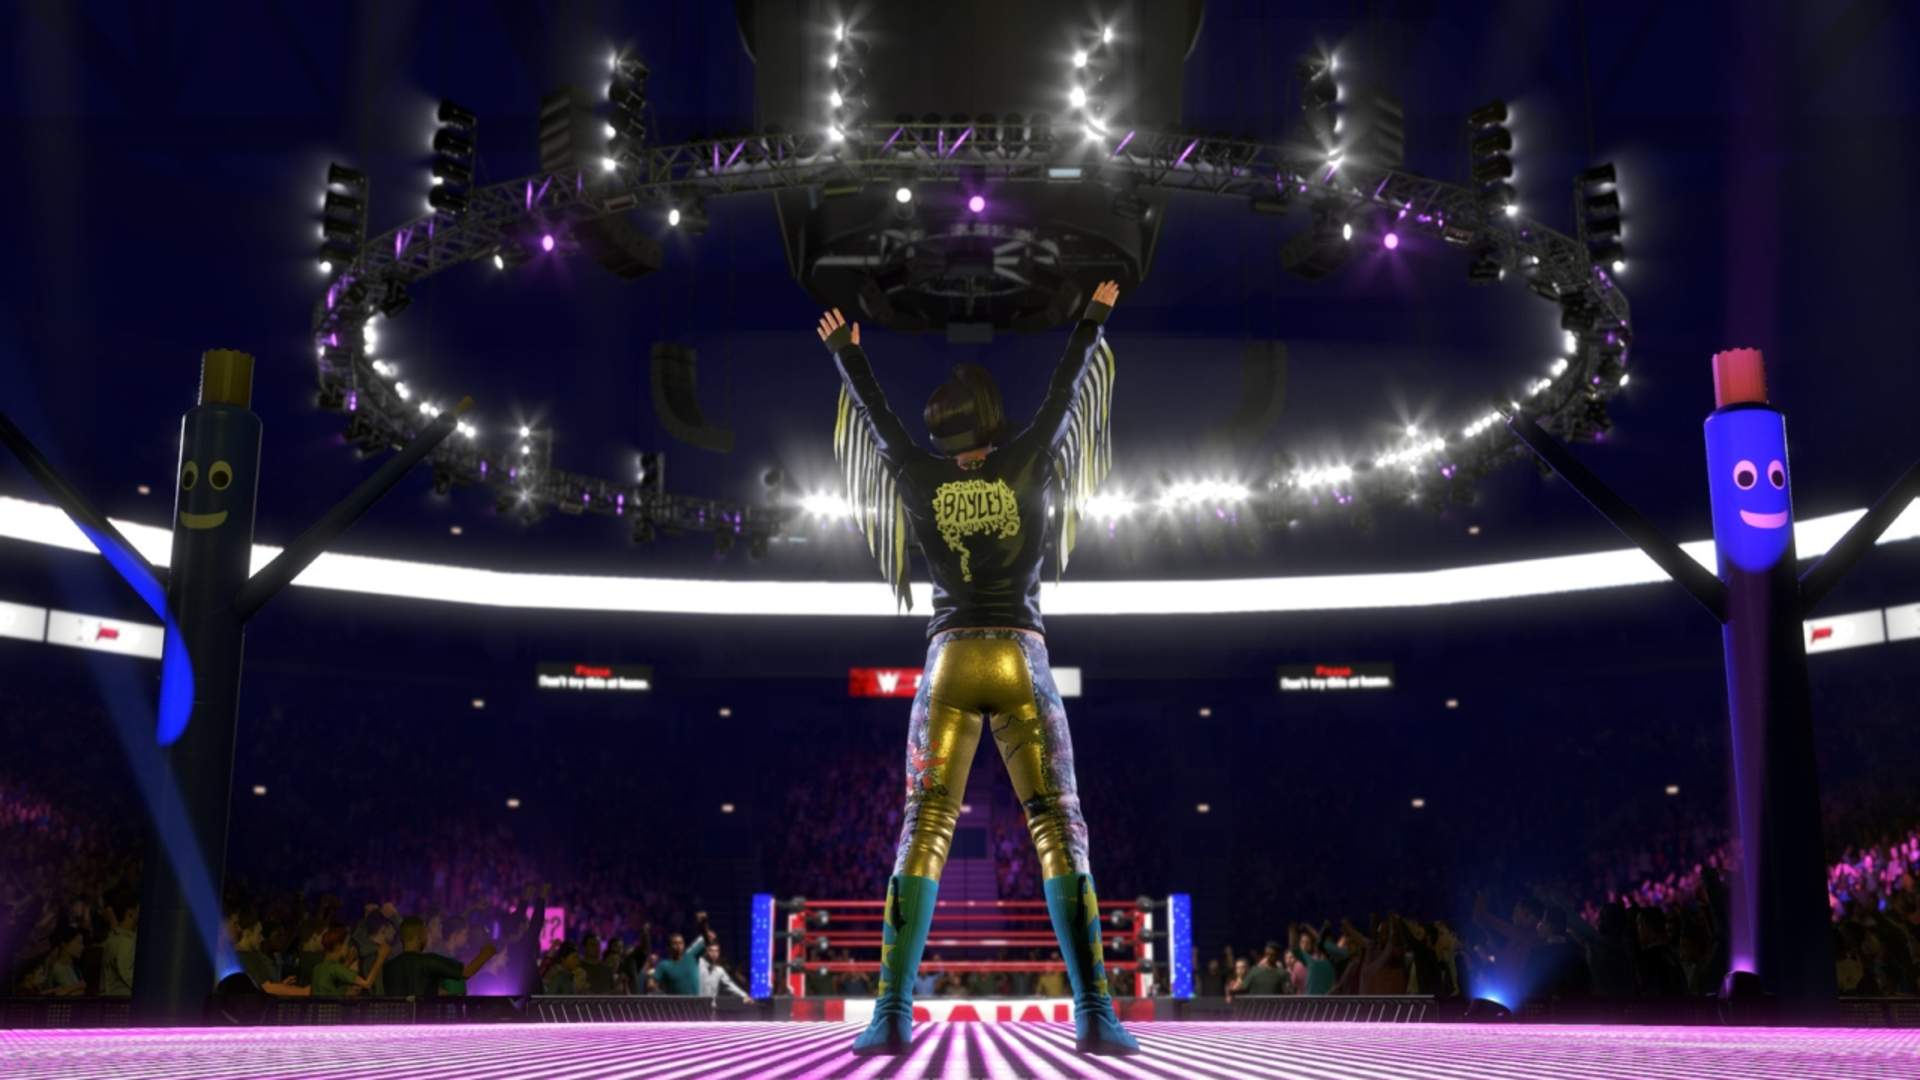 Reports suggest WWE 2K21 is cancelled and replaced by new title